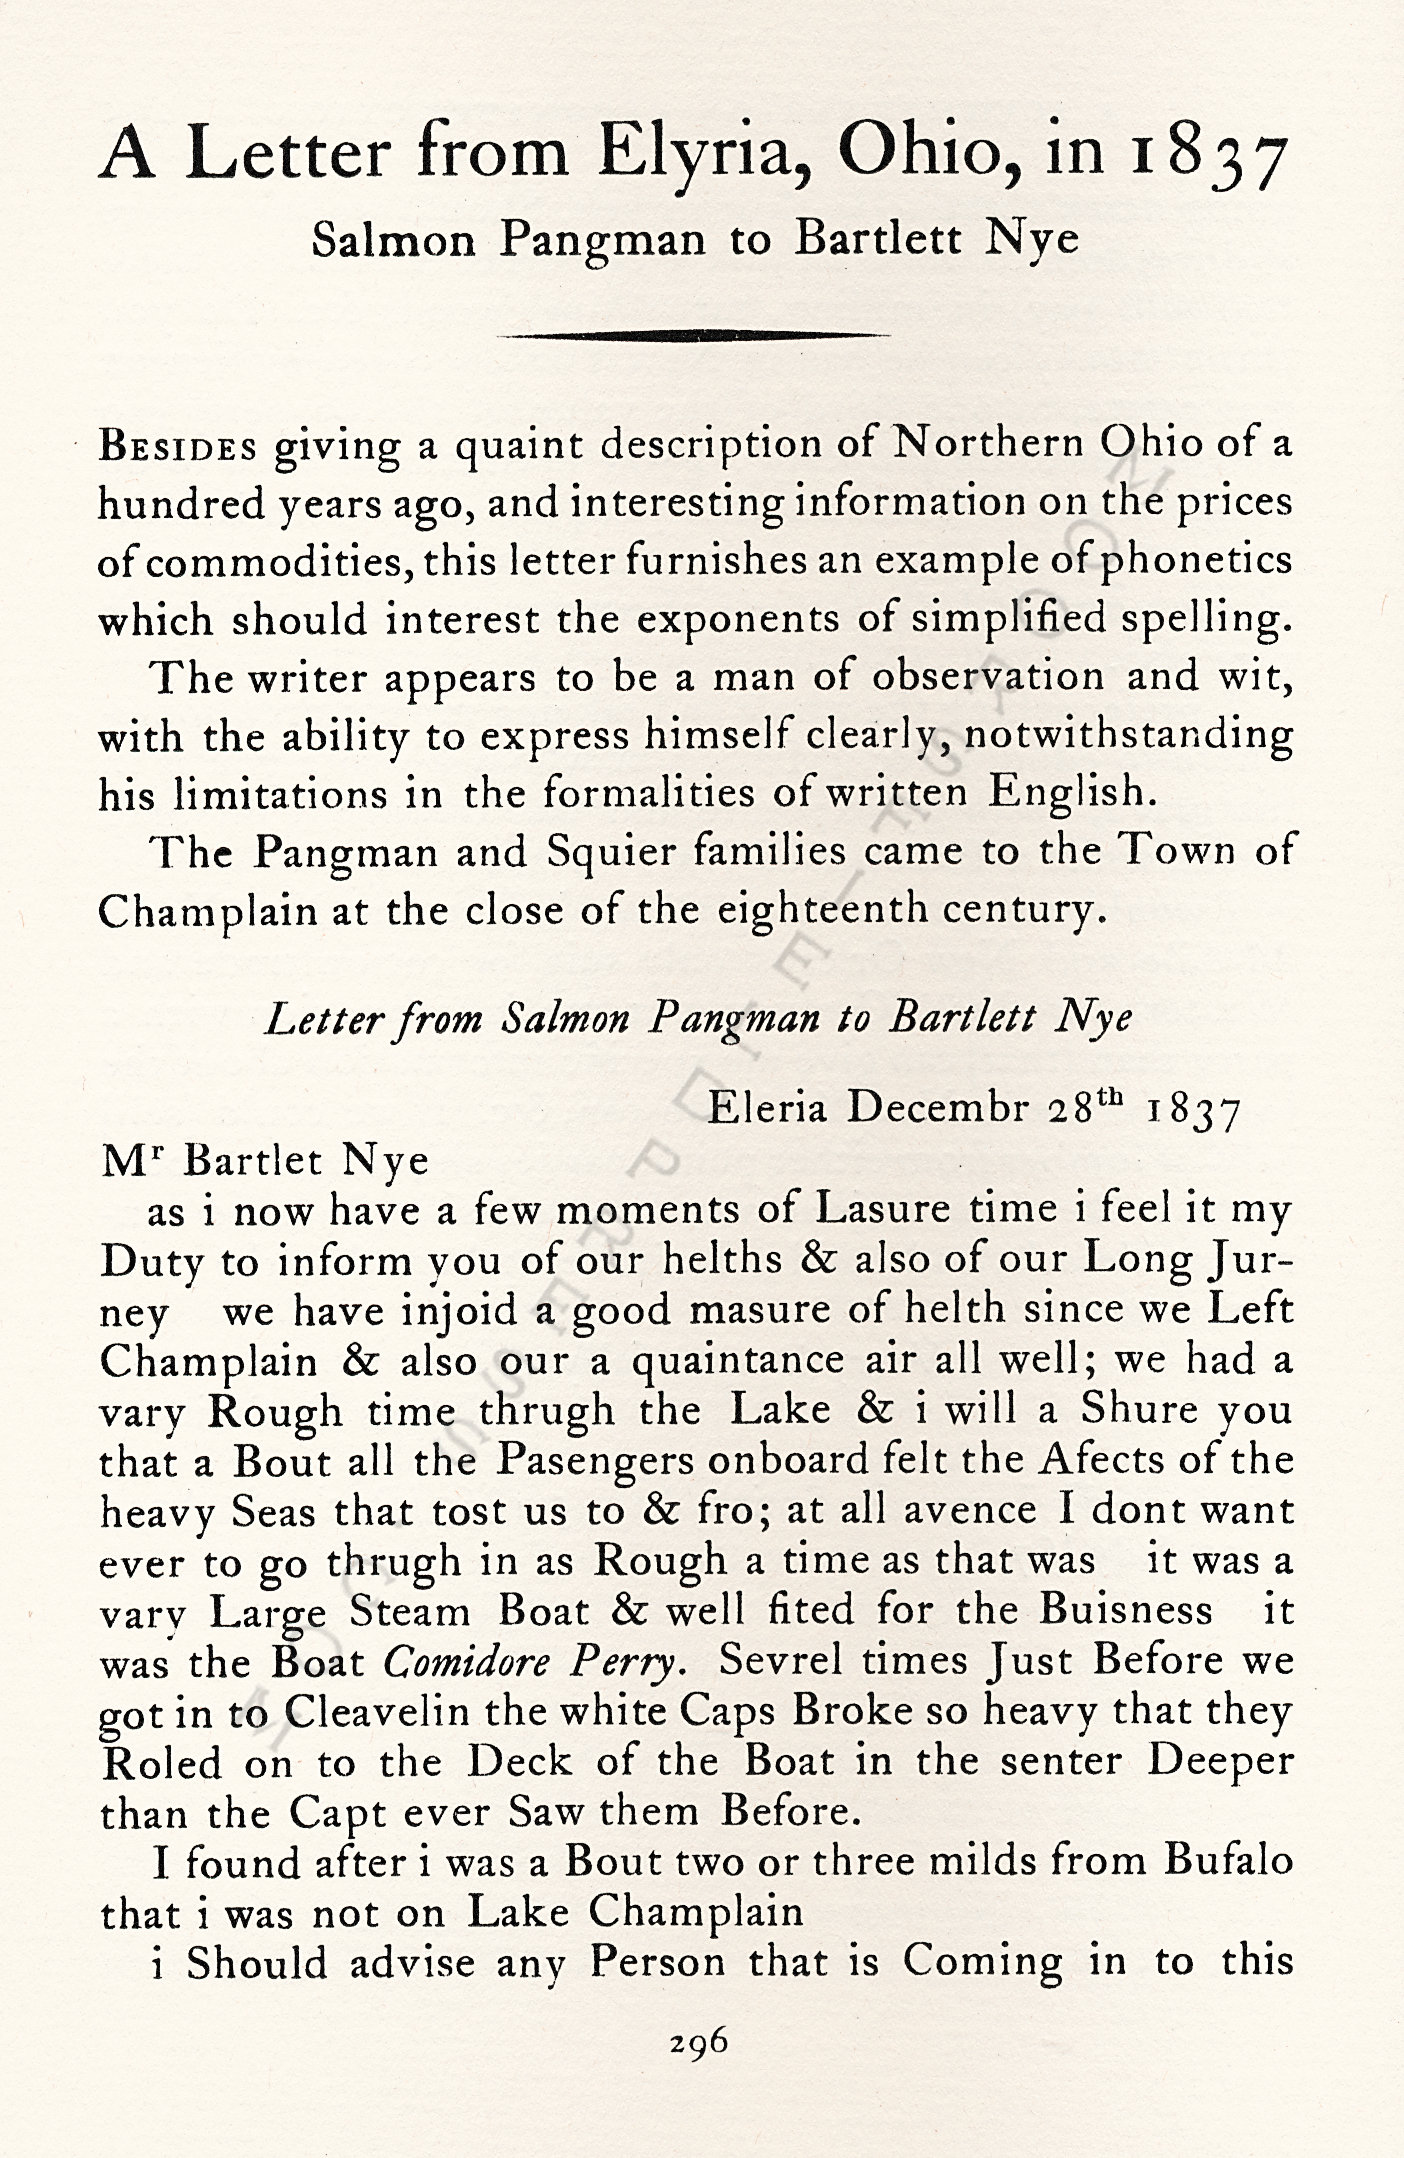 A Letter
                      From Elyria Ohio In 1837-Salmon Pangman to
                      Bartlett Nye of Champlain, New York